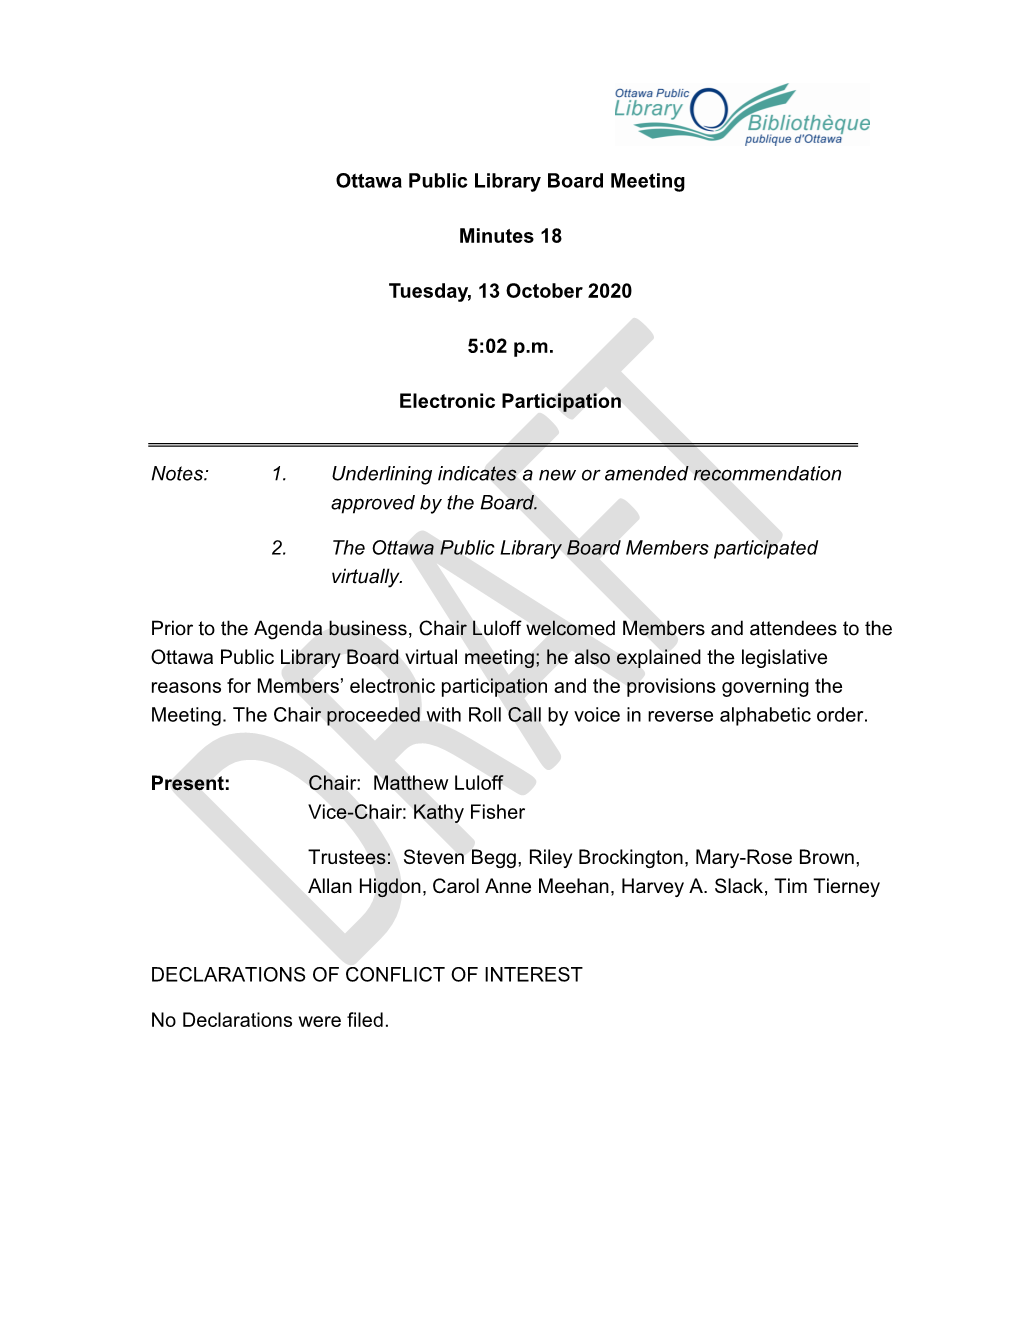 Ottawa Public Library Board Meeting Minutes 18 Tuesday, 13 October 2020 5:02 Pm Electronic Participation Notes